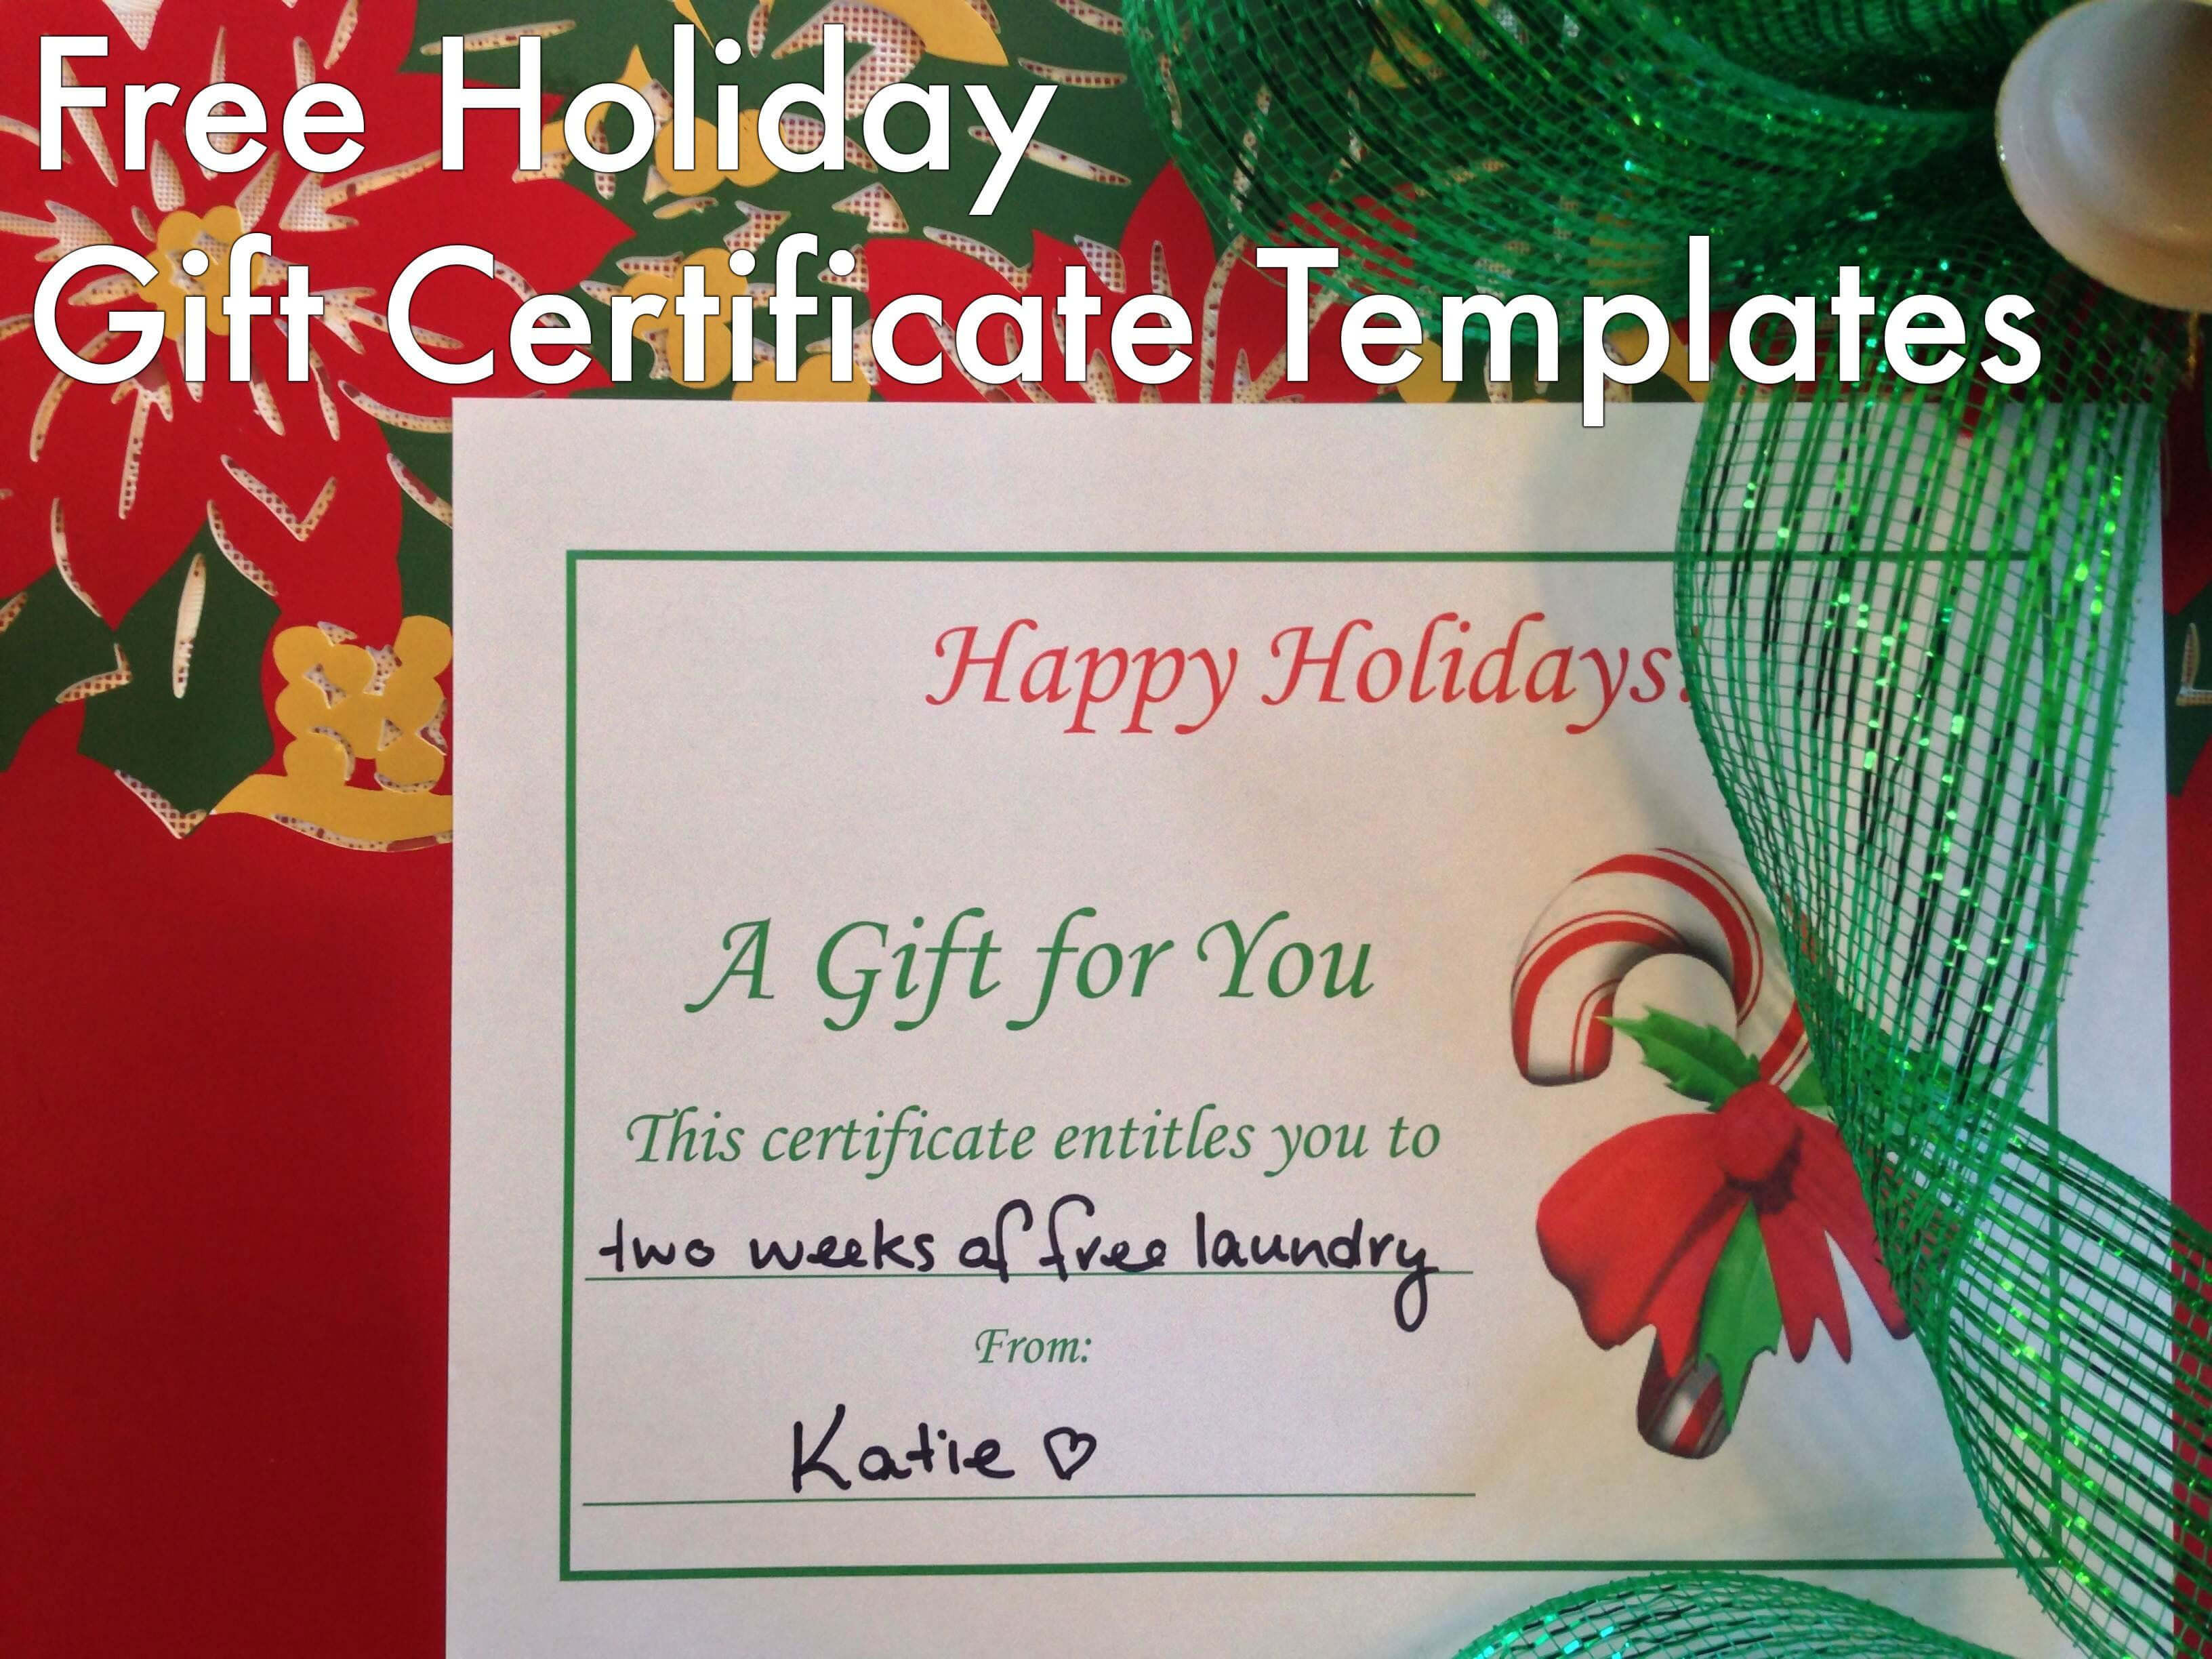 Free Holiday Gift Certificates Templates To Print | Tis The Inside Free Christmas Gift Certificate Templates